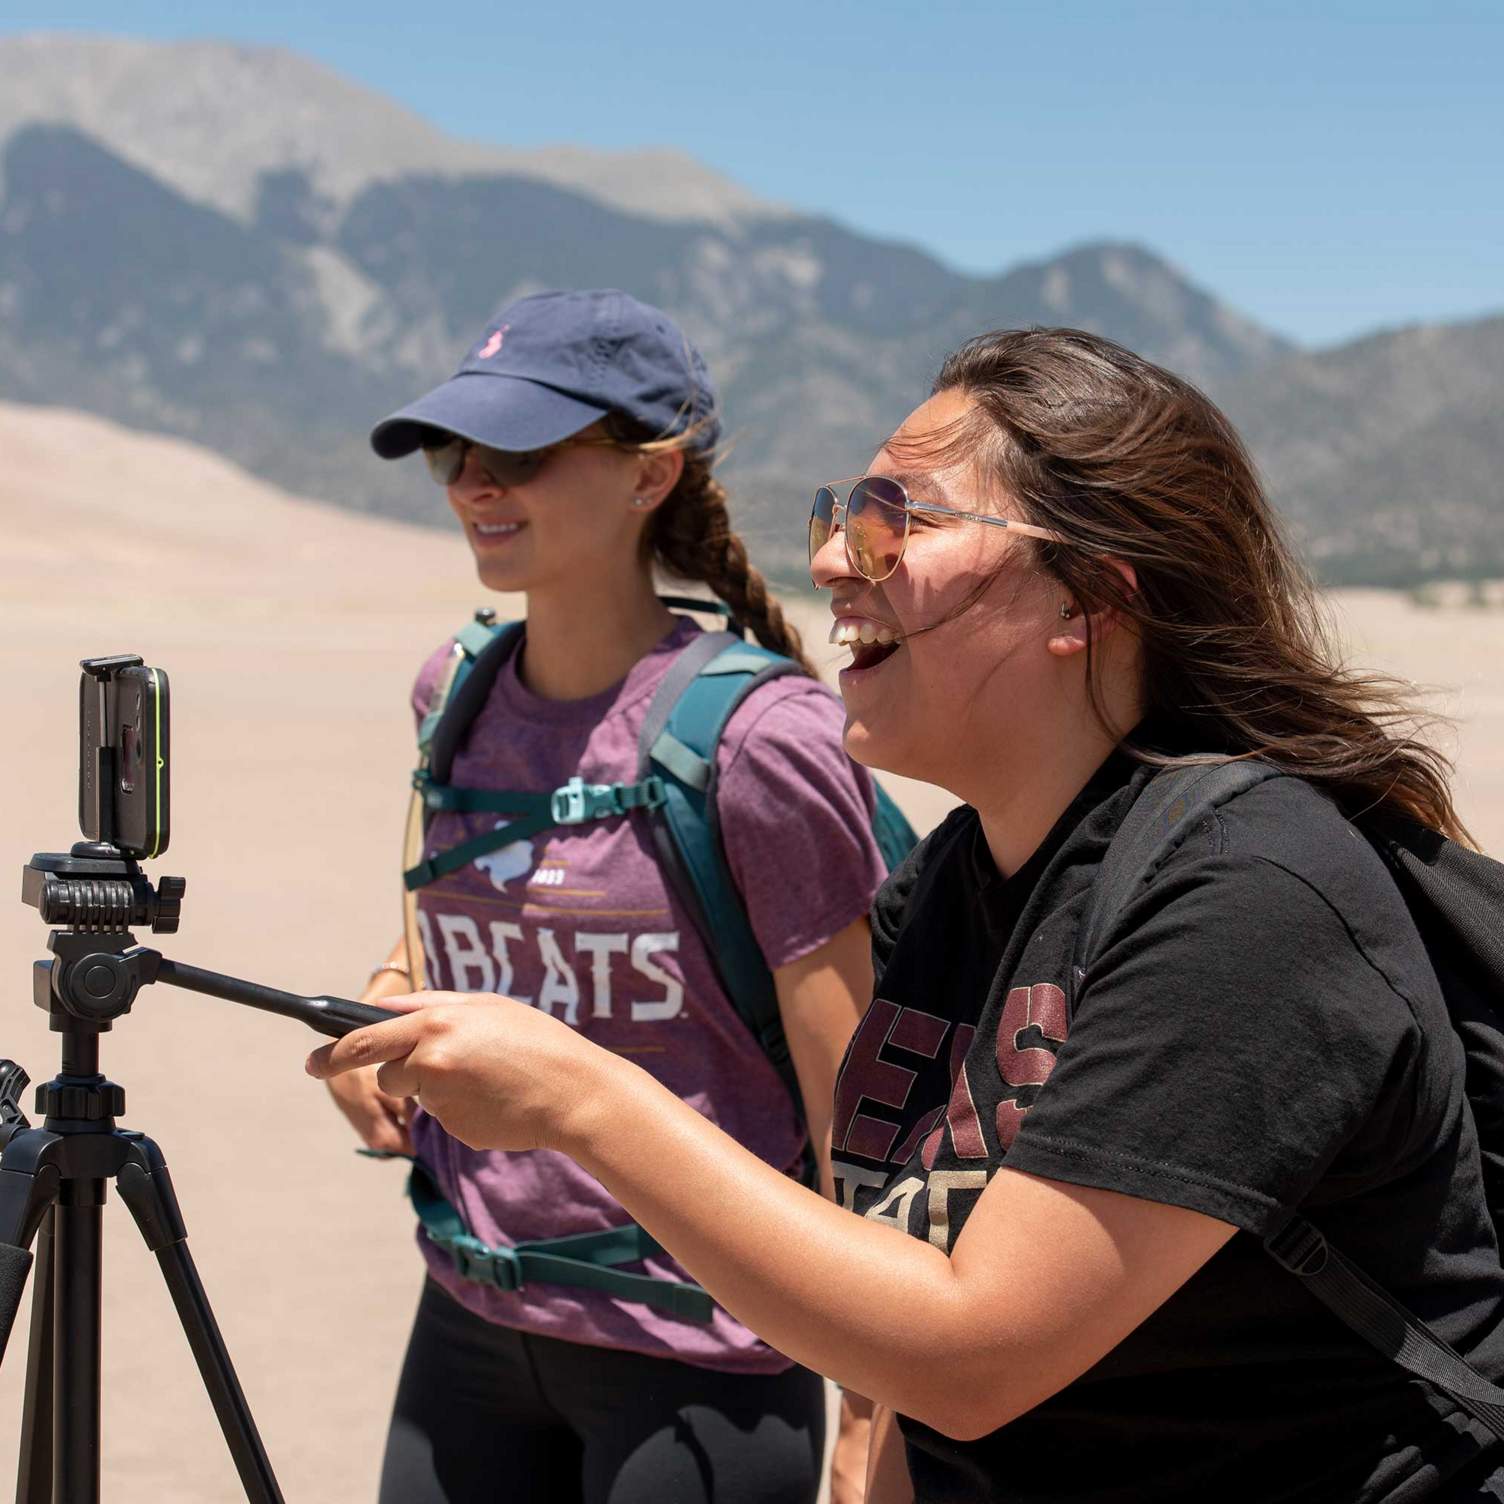 A student laughs while taking a picture with a tripod